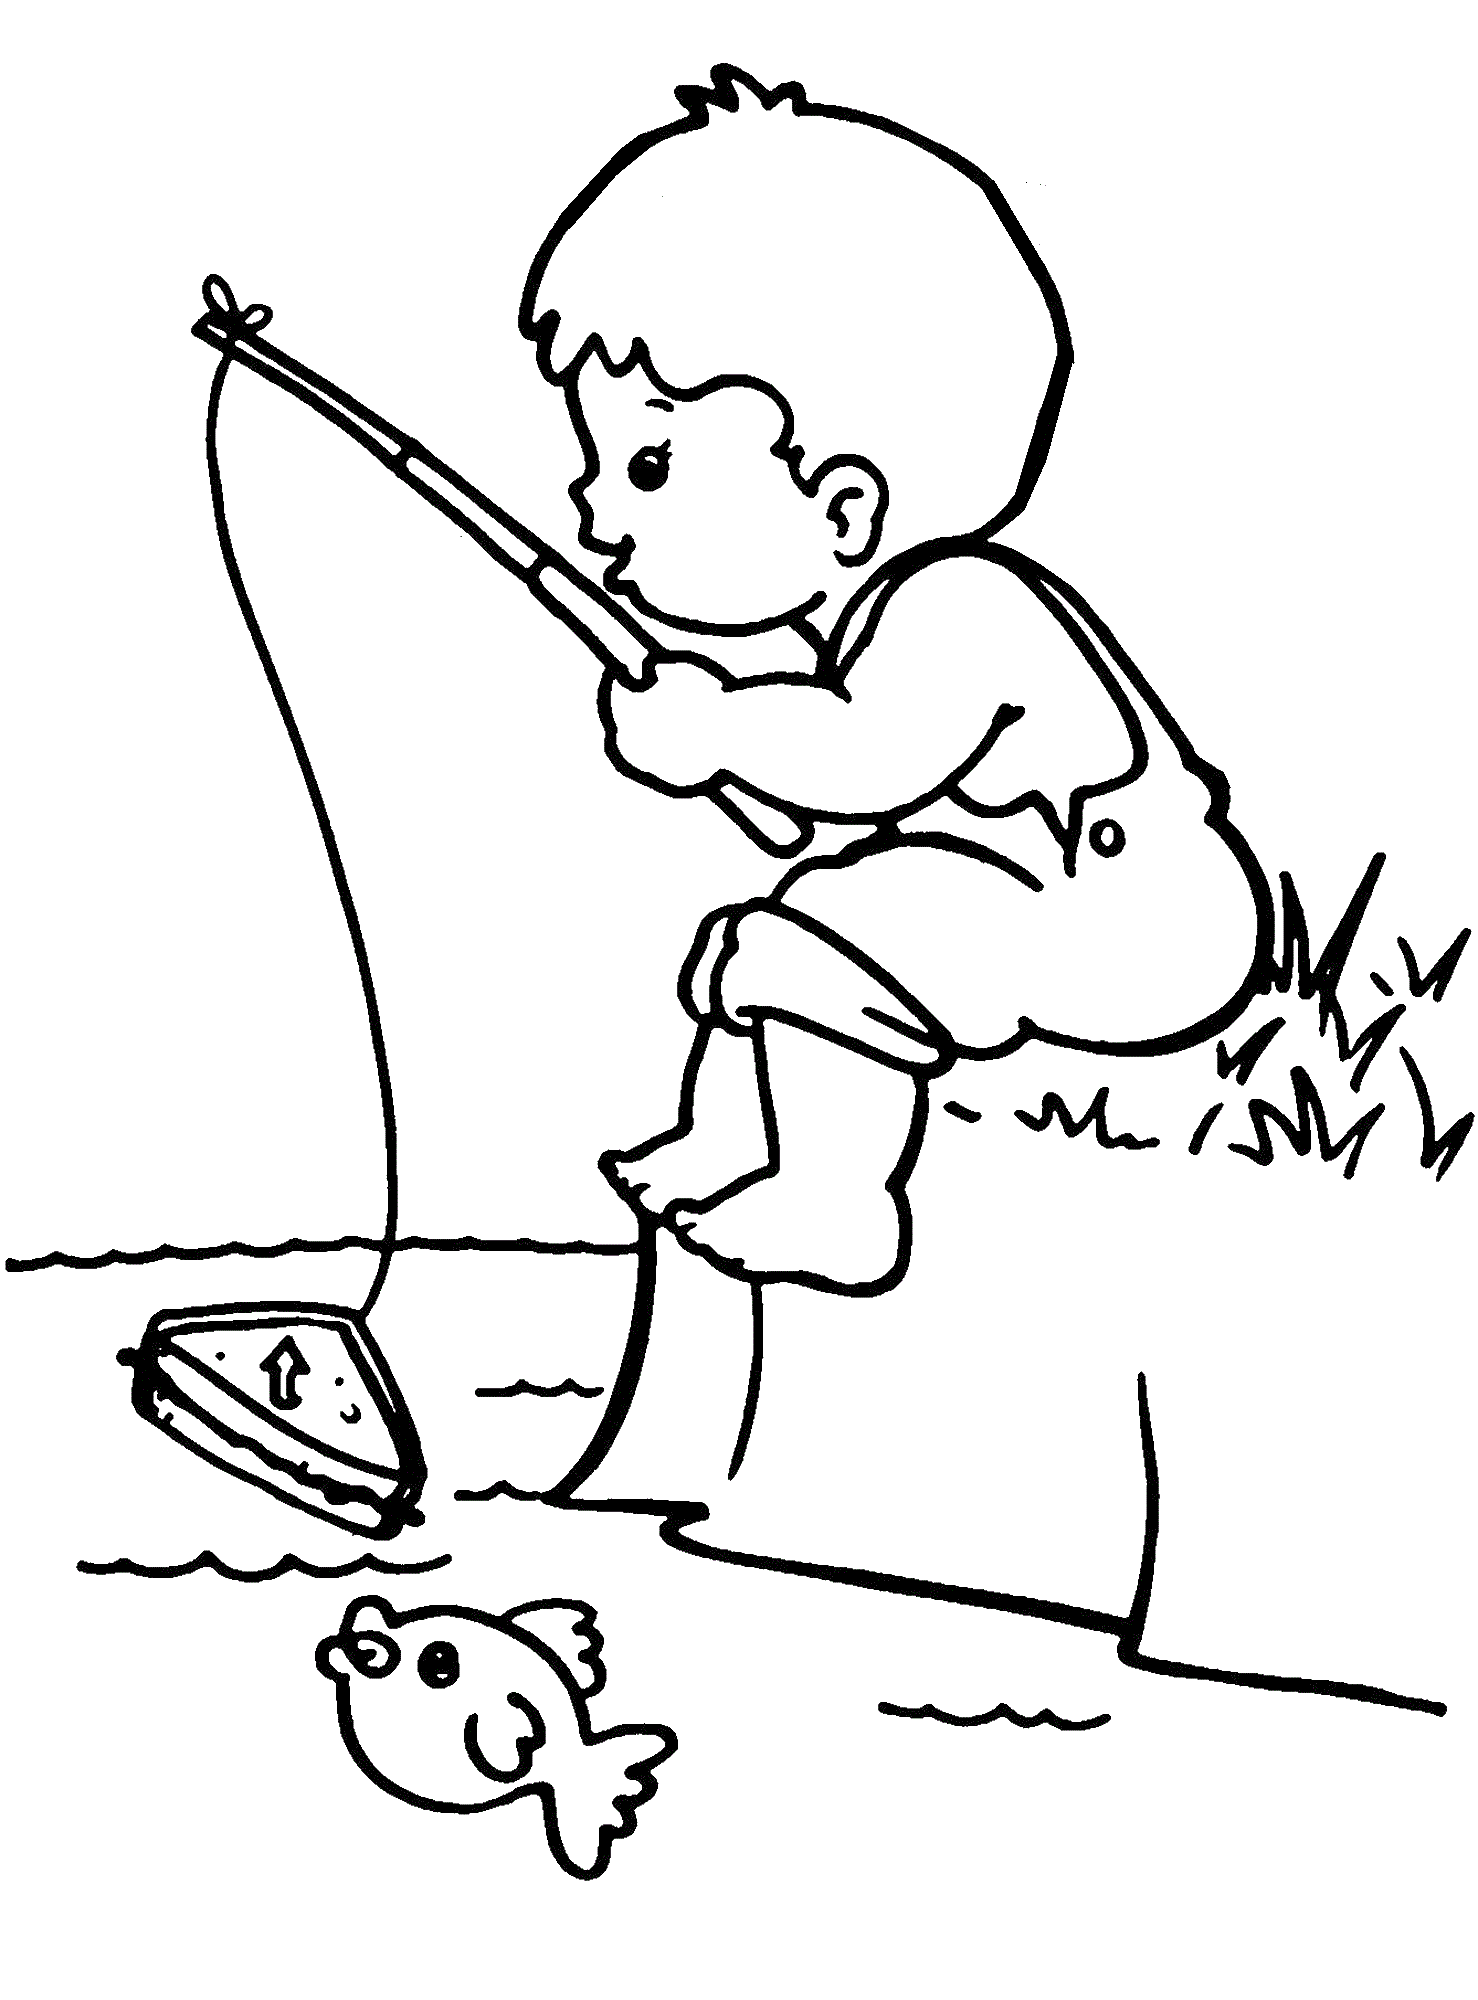 Boy fishing coloring page